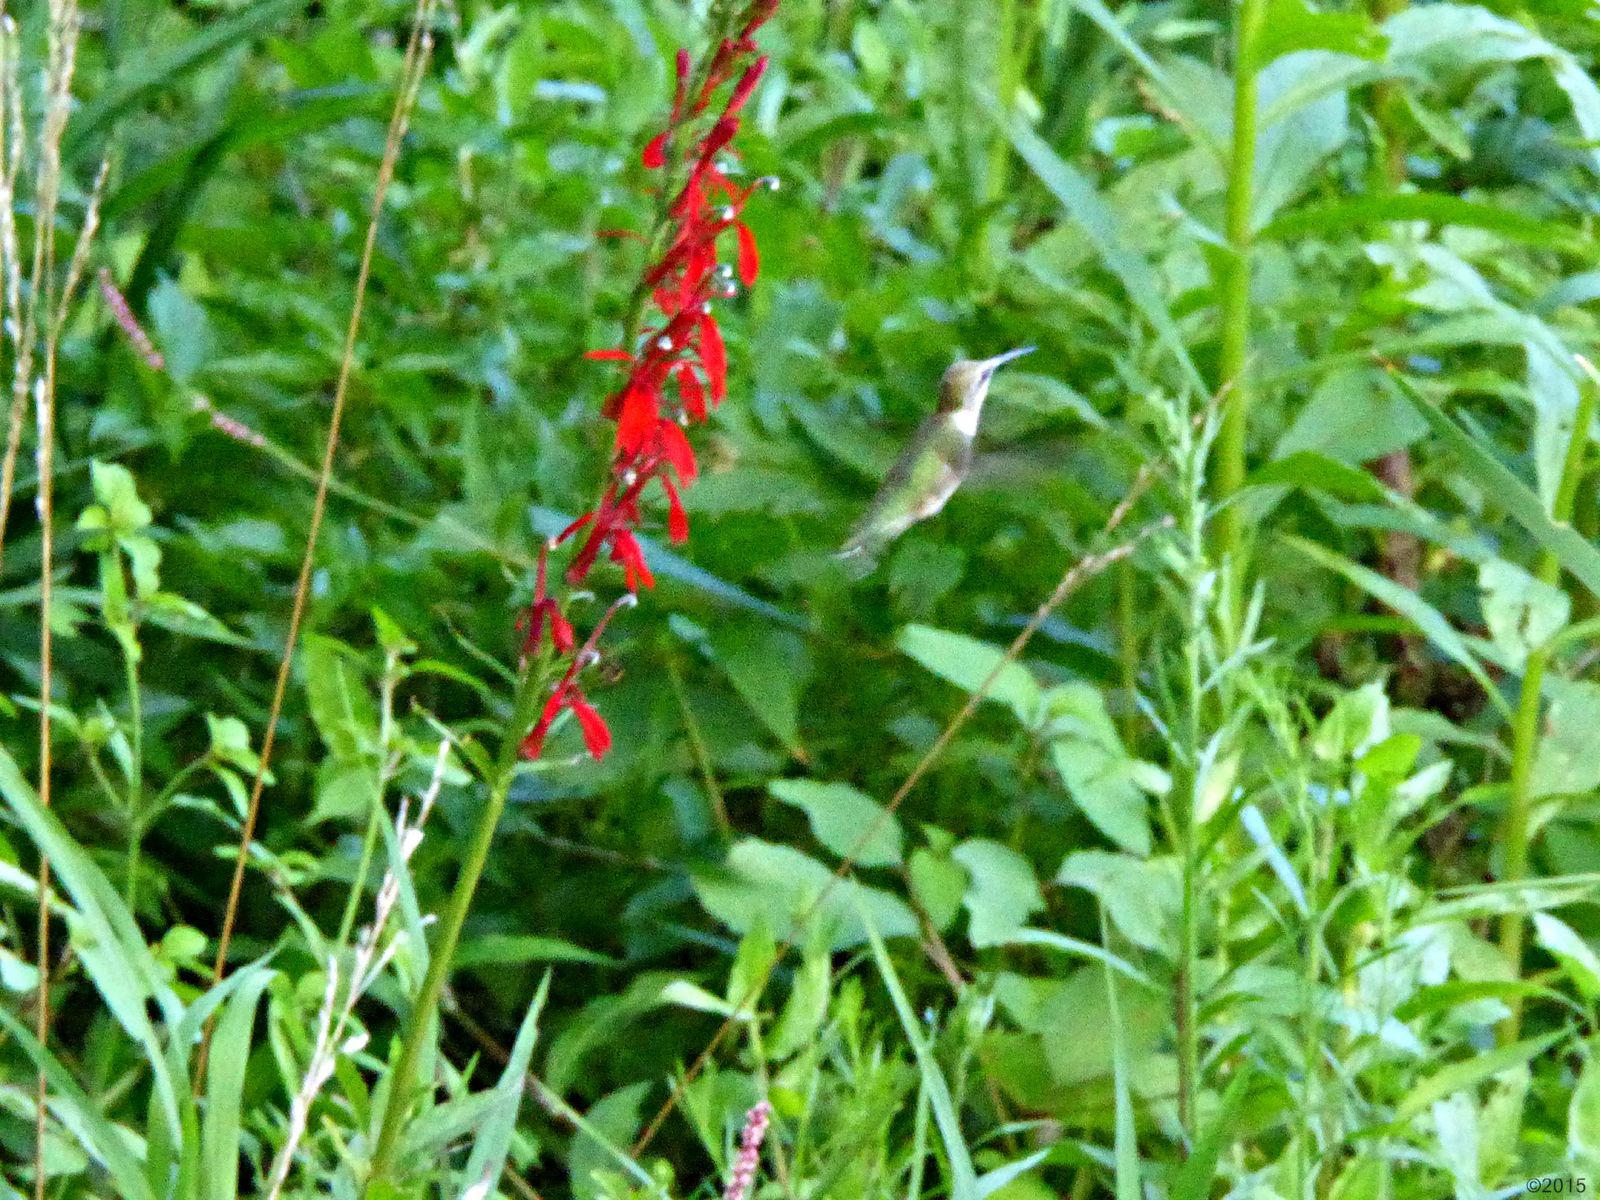 August 22, 2015 - Hummingbird and Cardinal Flower in Bent Tree